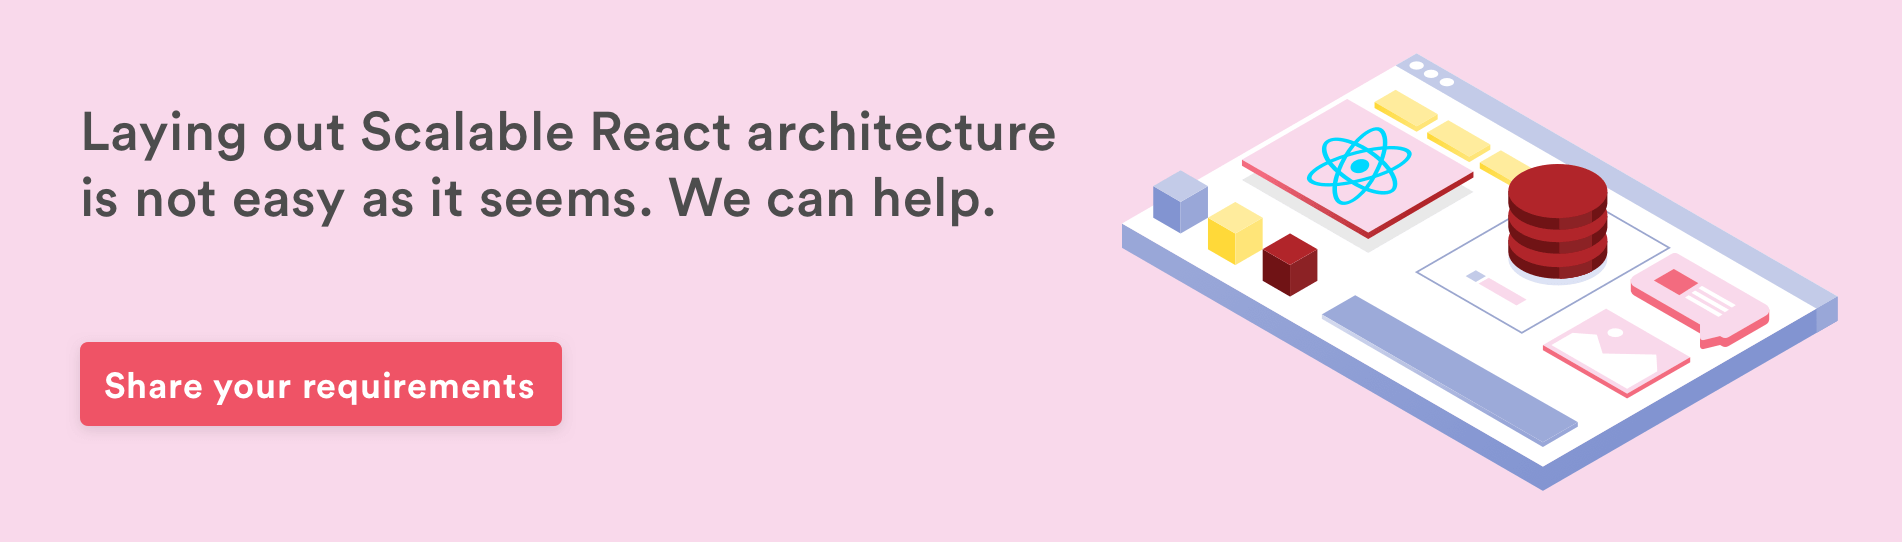 React Architecture Services